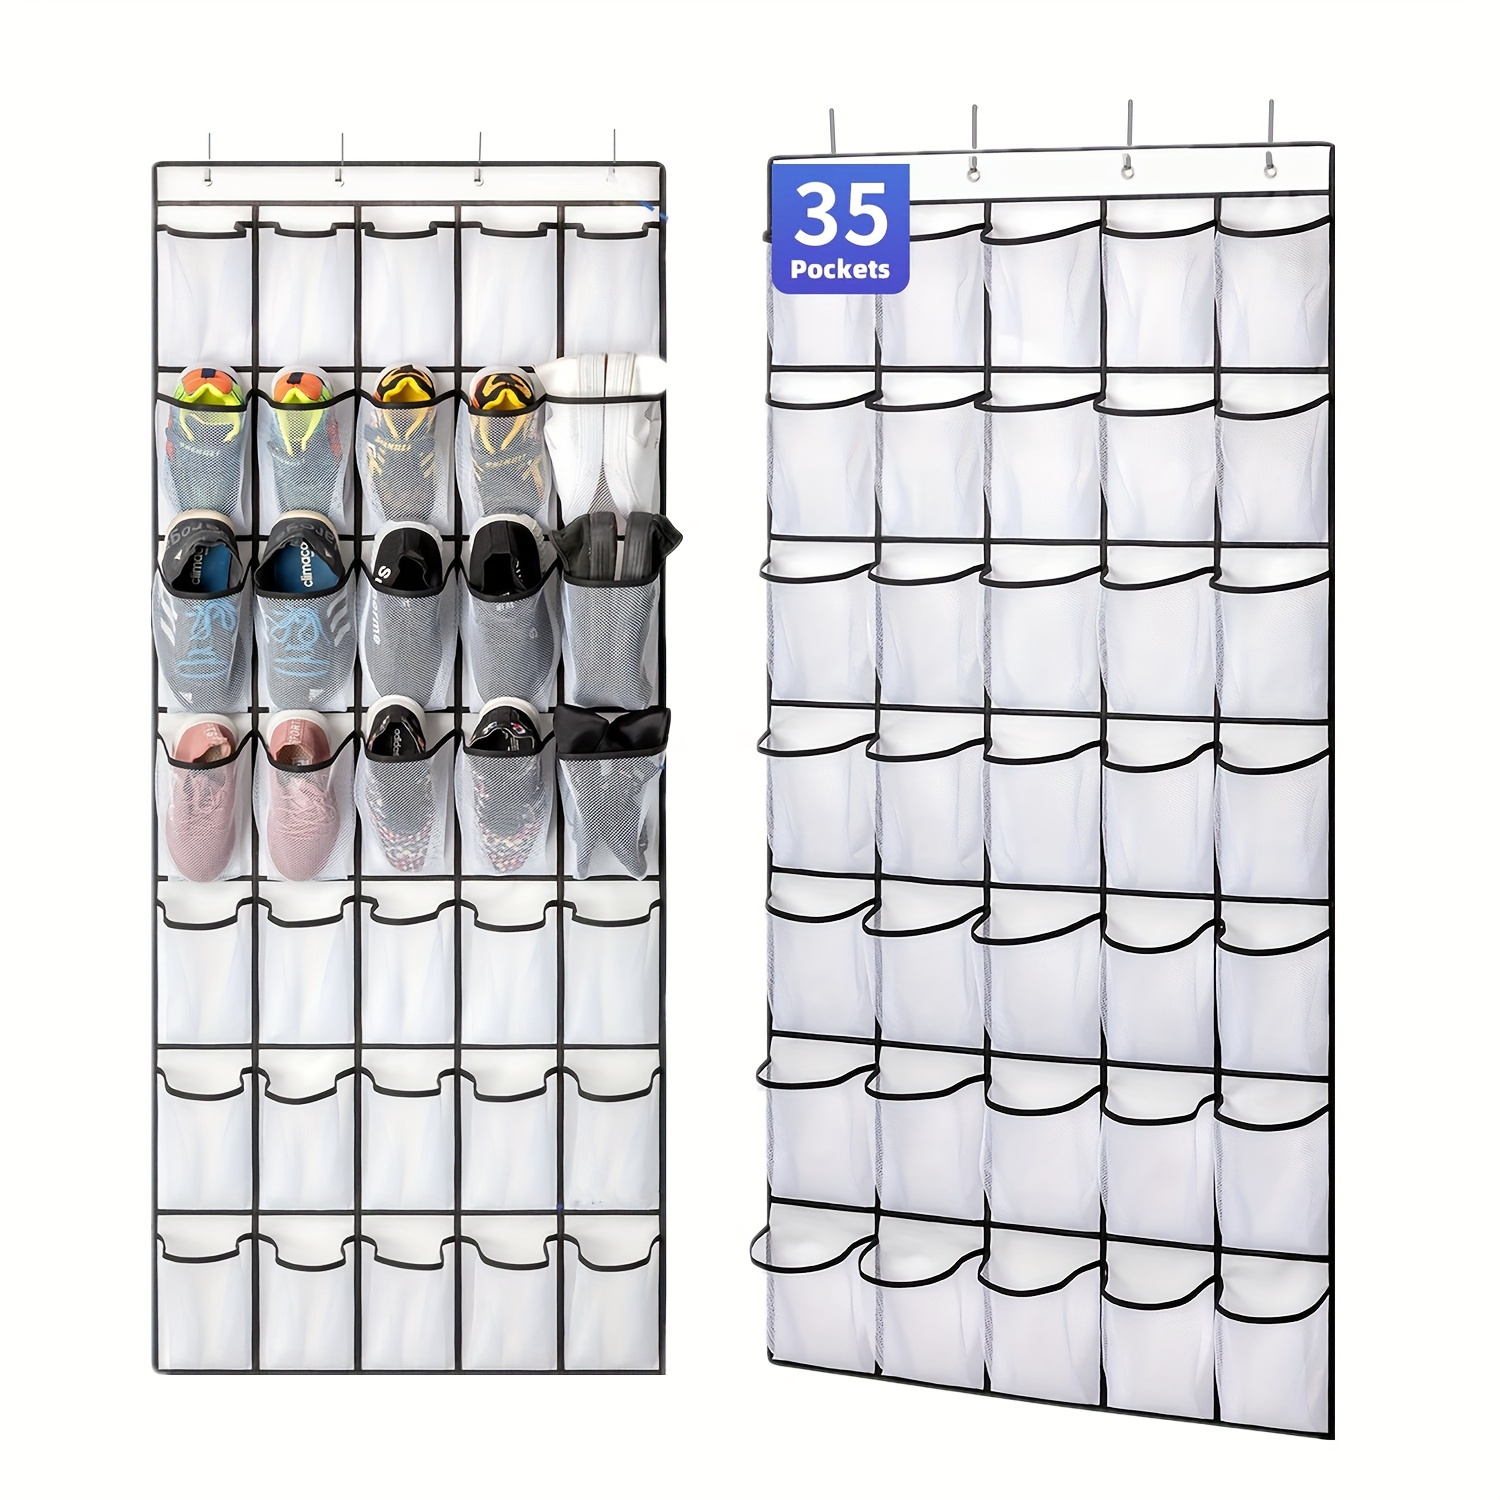 

35-pocket Shoe Storage Rack - Durable Canvas Storage Space, Suitable For Shoes, Toys, Etc. - 4 Metal Hooks, Space-saving Home Solution